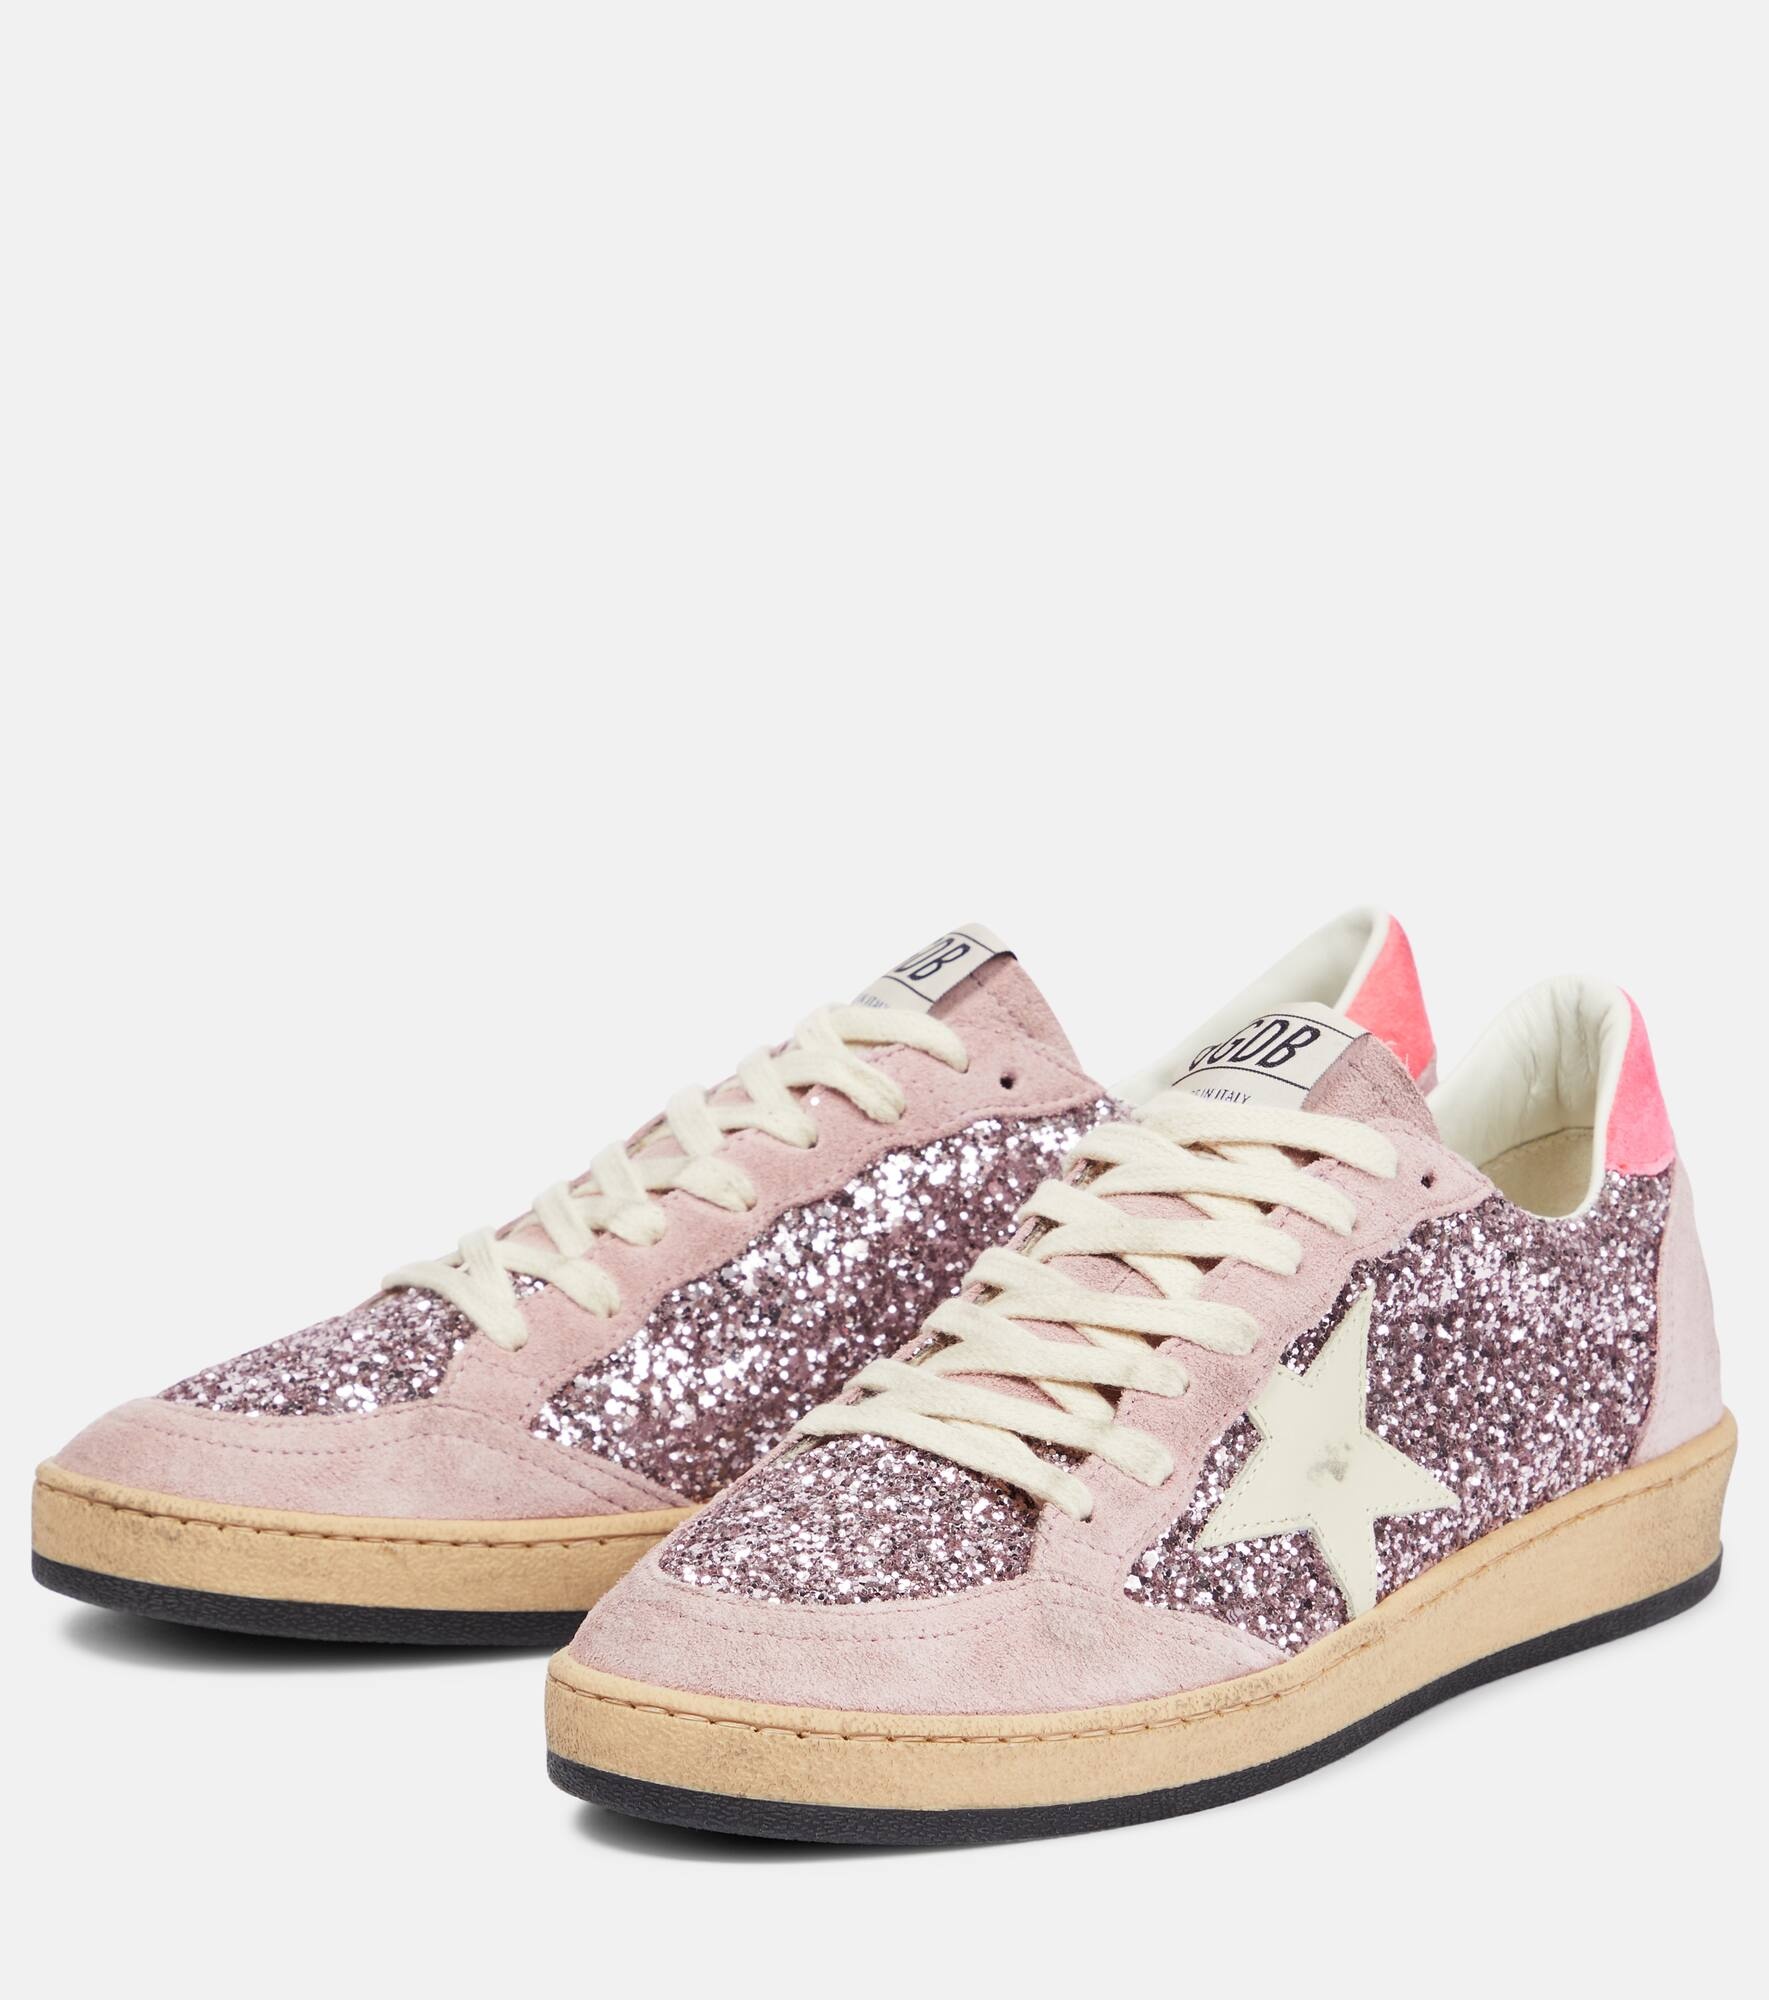 Ball Star glitter suede sneakers - 5